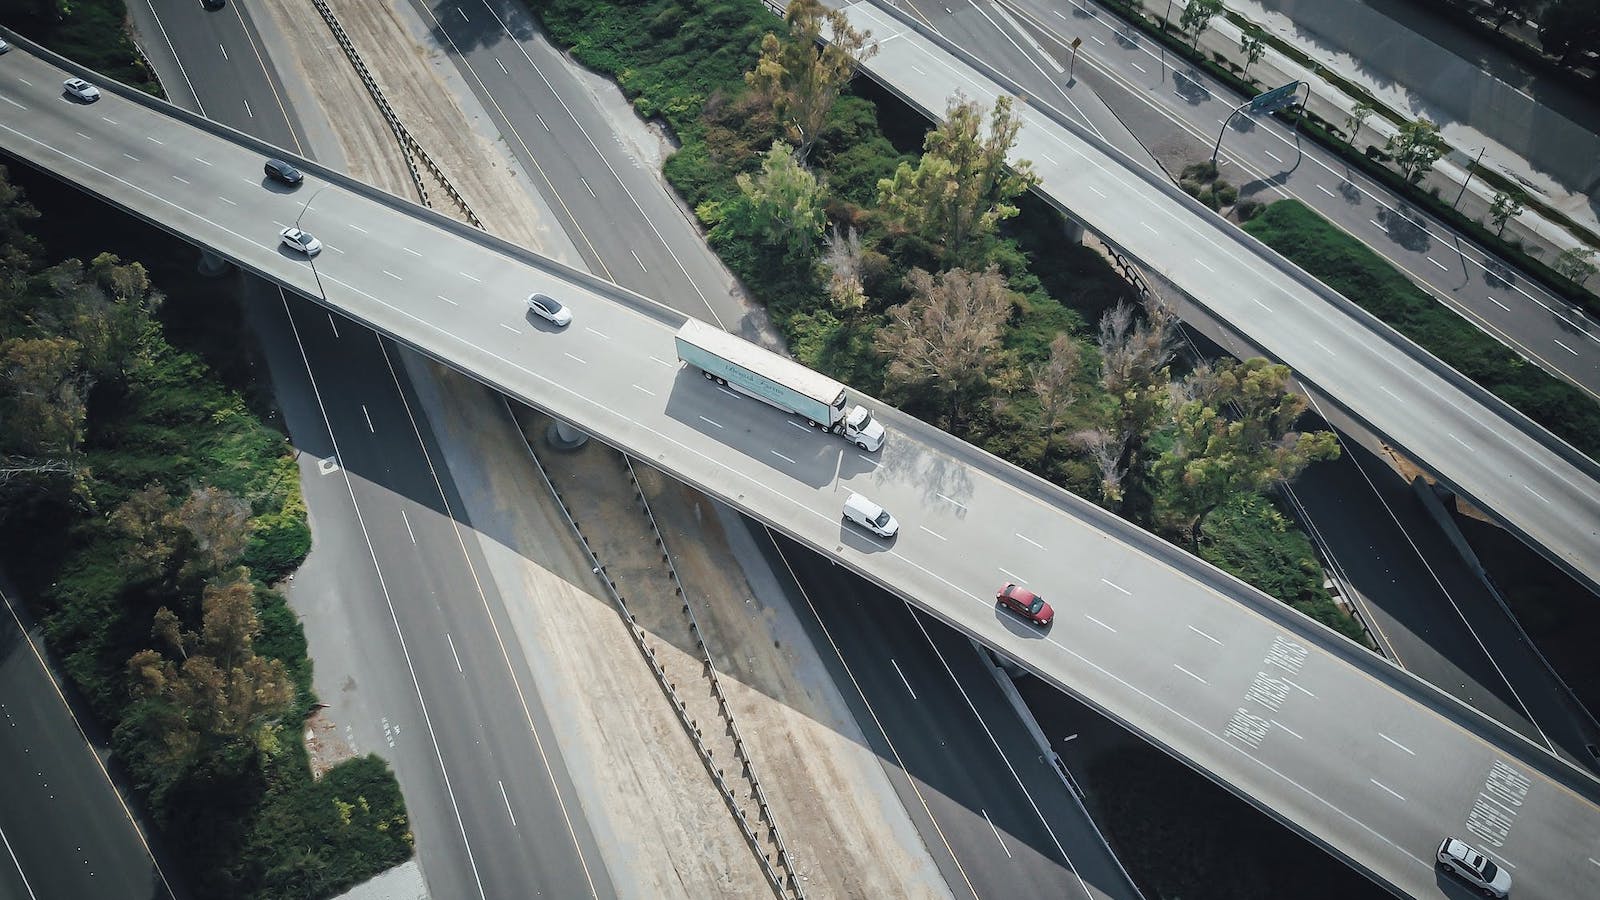 Overhead view of a freeway with several cars driving on it